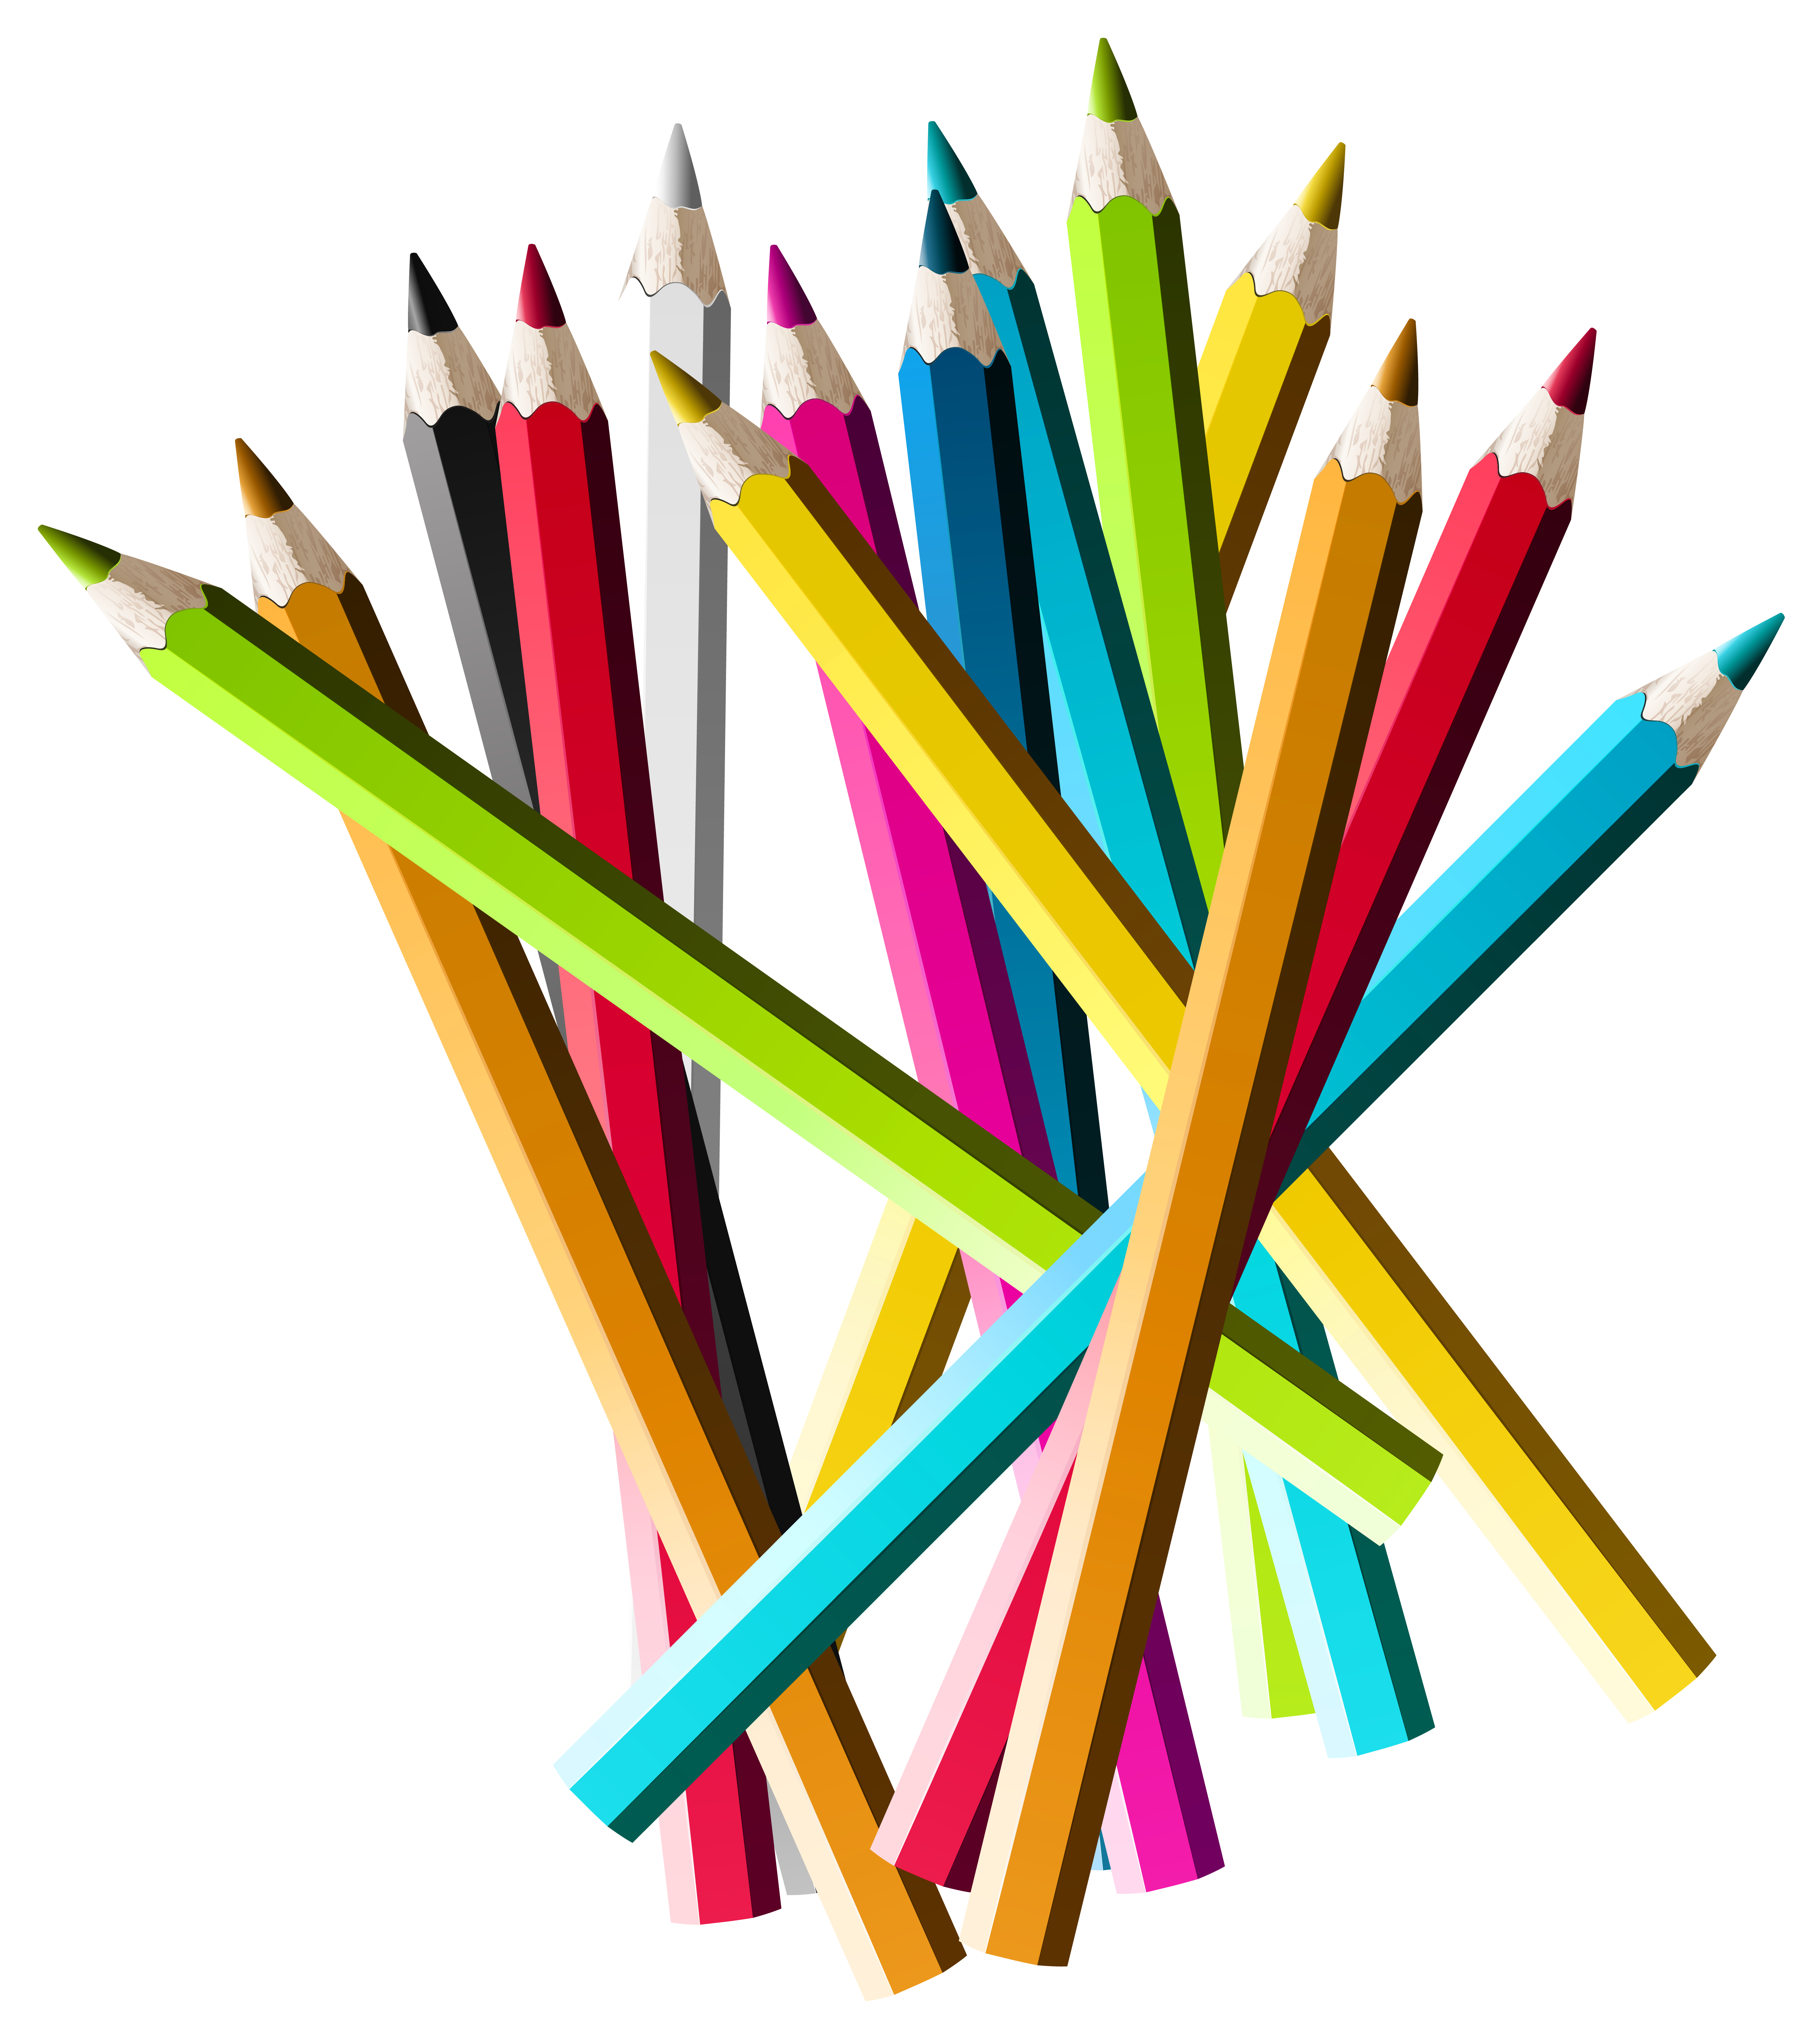 Colorful png picture gallery. Pencils clipart valentine